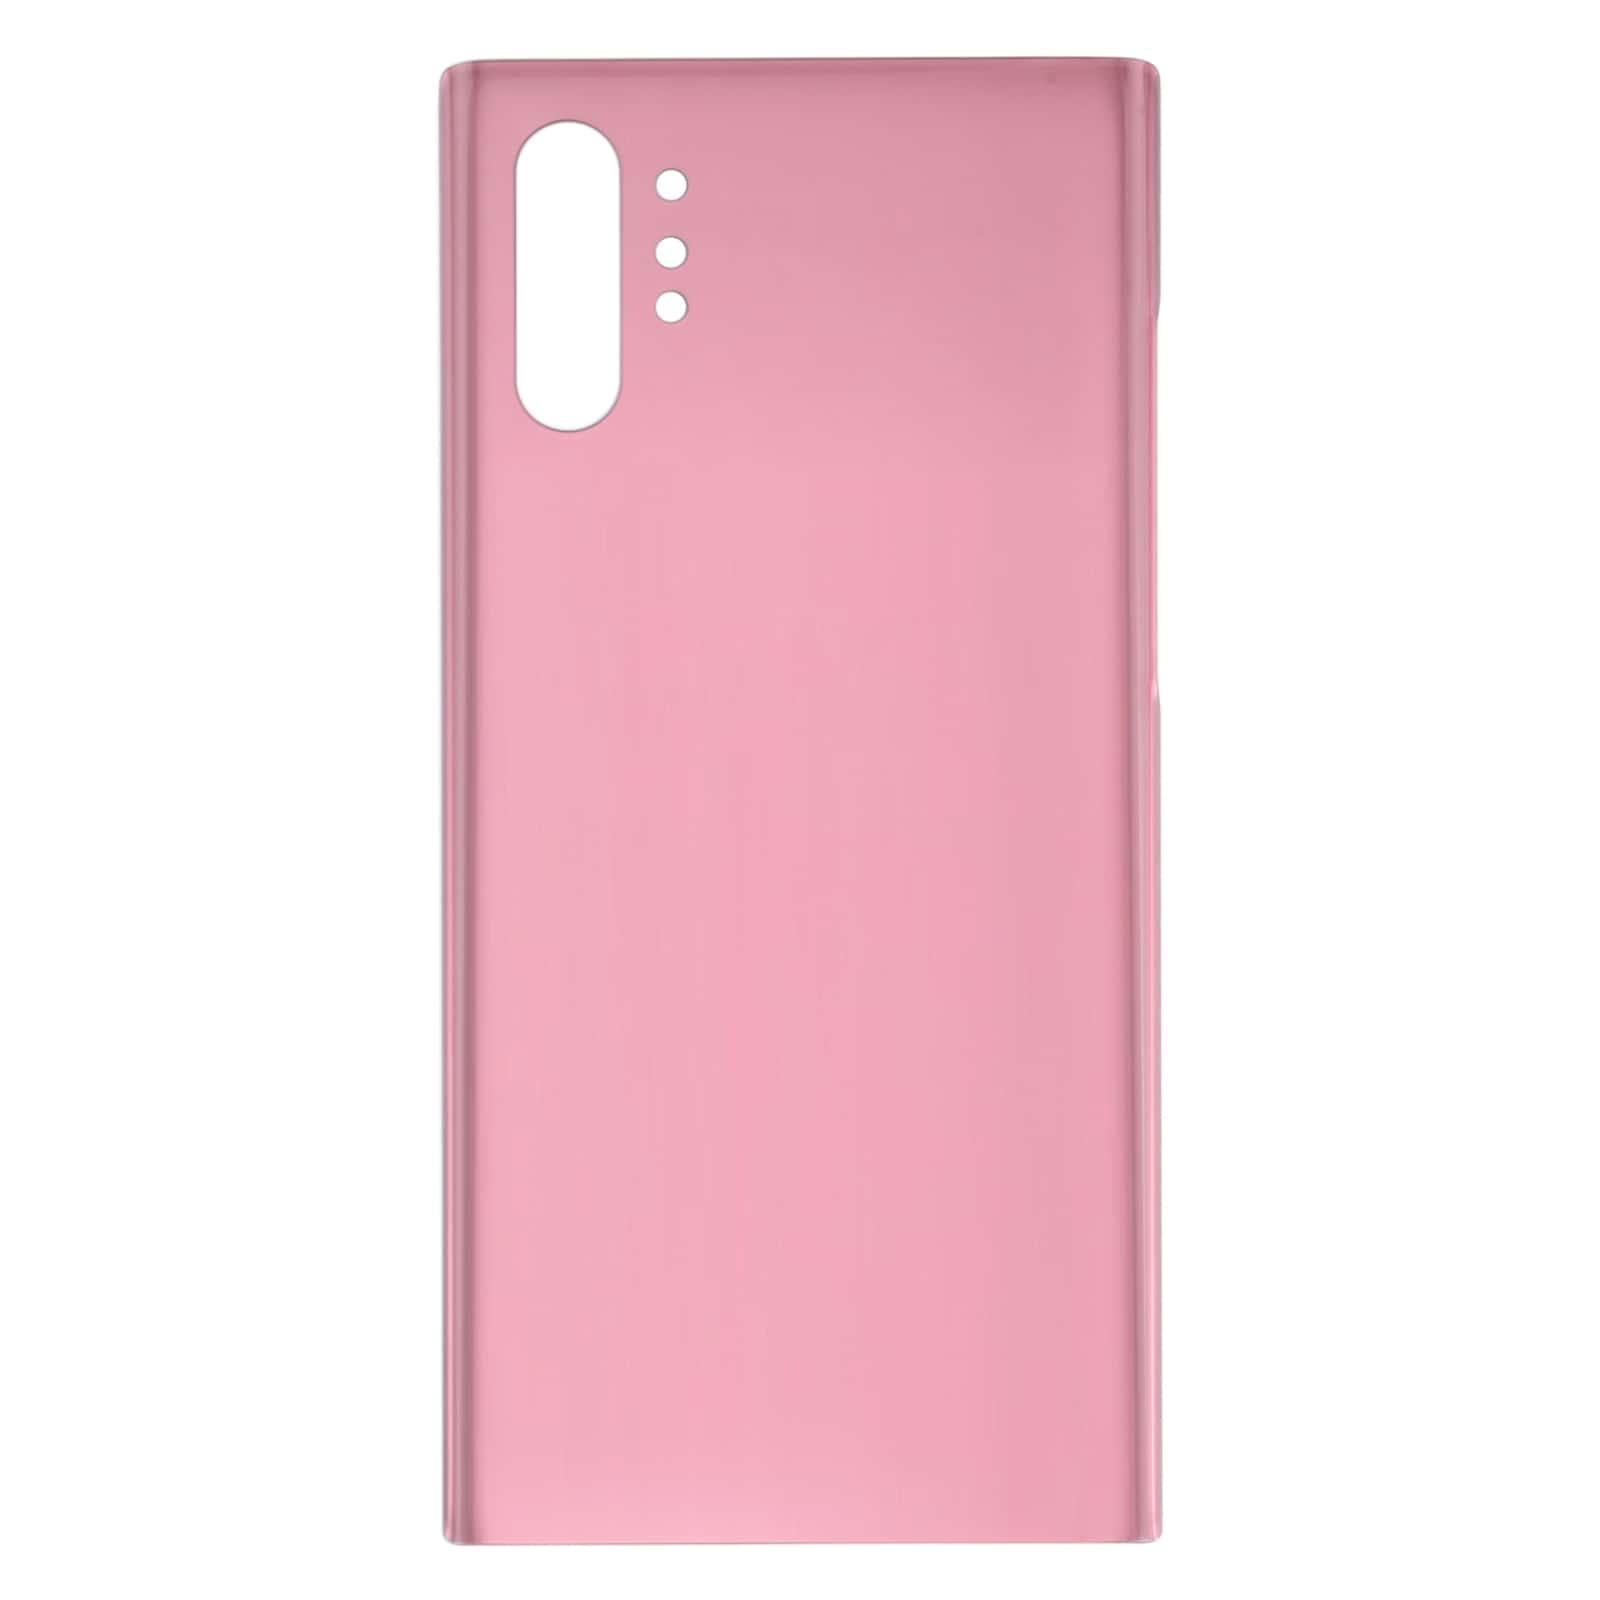 Back Glass Panel for  Samsung Galaxy Note10 Plus Pink